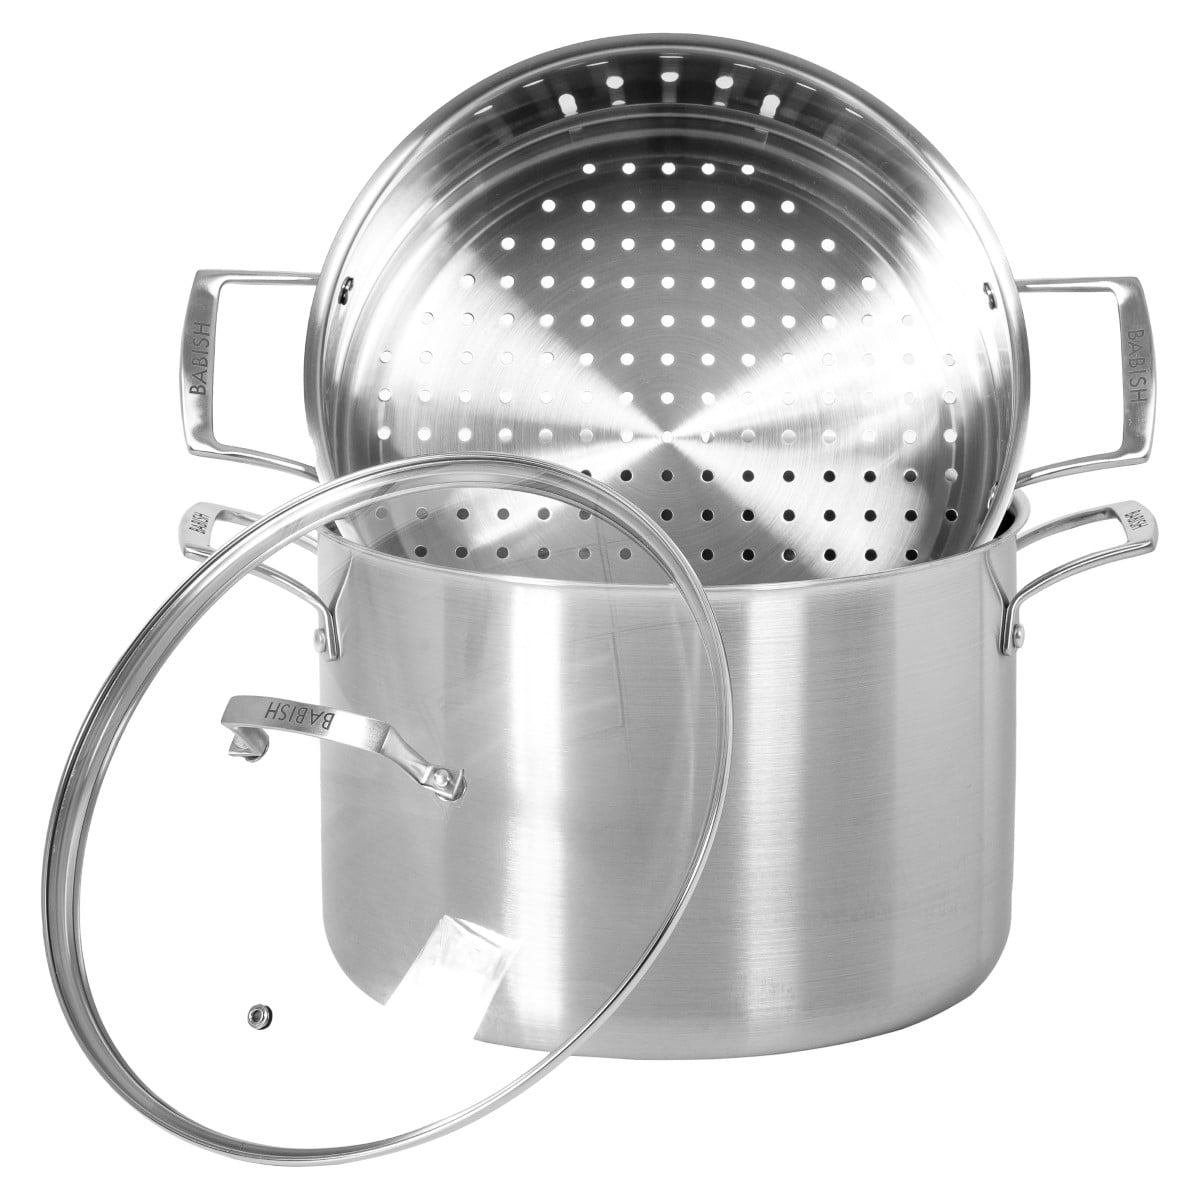  Babish Tri-Ply Stainless Steel Professional Grade Stock Pot  w/Lid, 12-Quart: Home & Kitchen